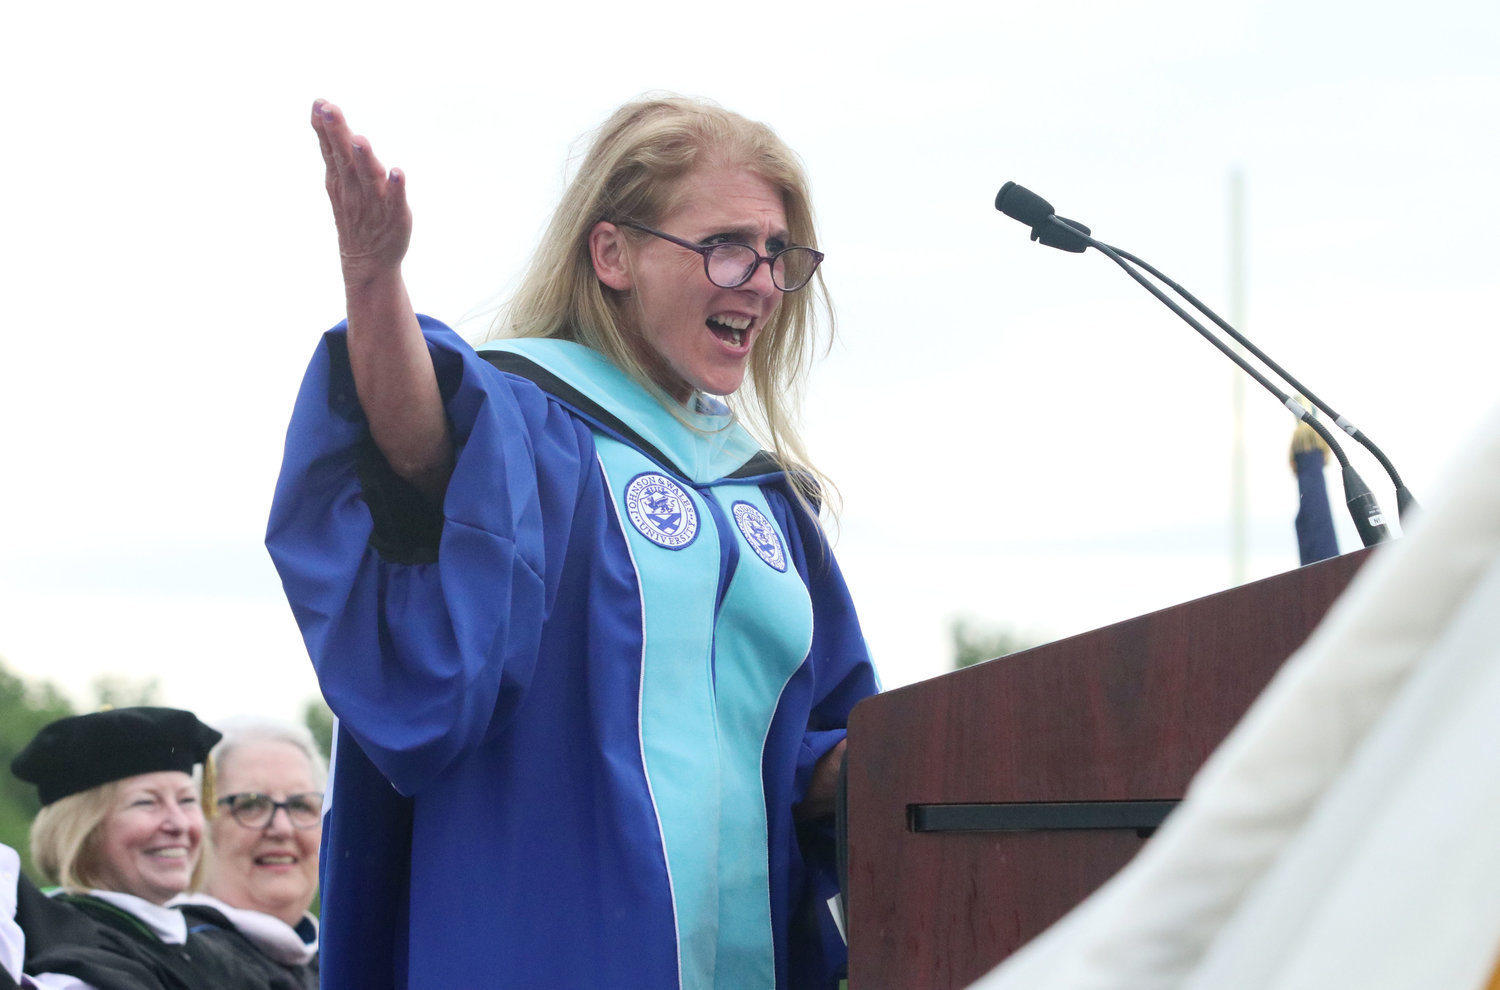 Principal Dr. Deborah DiBiase talks to the graduates of the Mt. Hope High School Class of 2021 last spring. “Dr. D,” as she’s commonly known, has been told that a majority of school committee members are not in favor of bringing her back next year.